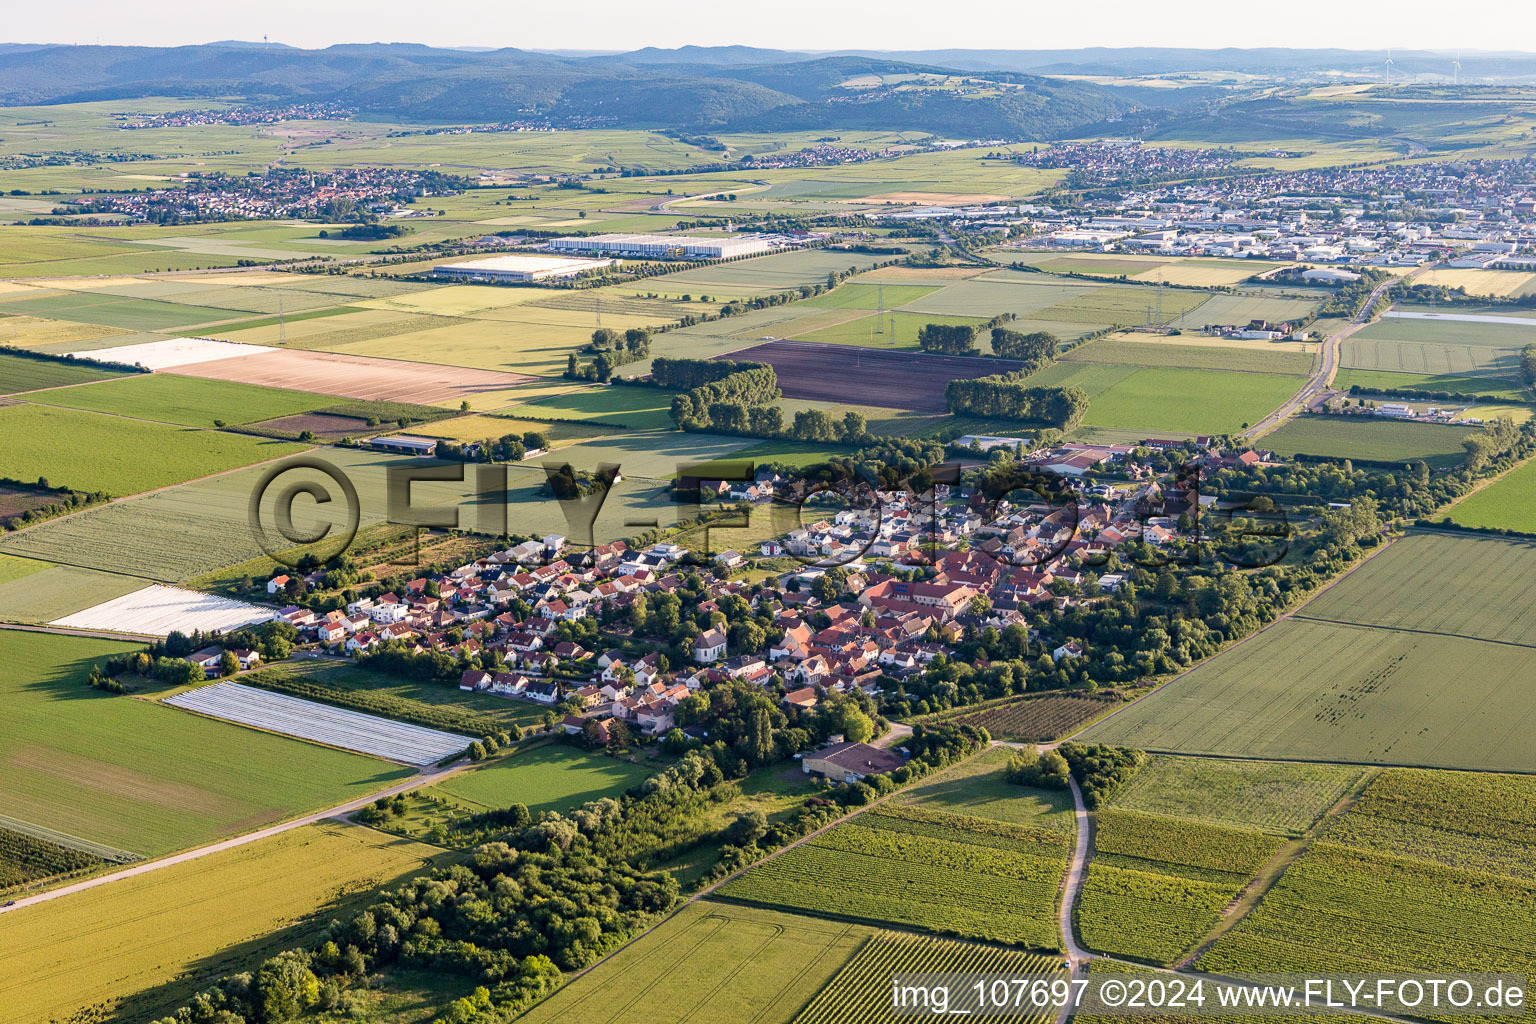 Aerial view of Agricultural land and field borders surround the settlement area of the village in Obersuelzen in the state Rhineland-Palatinate, Germany